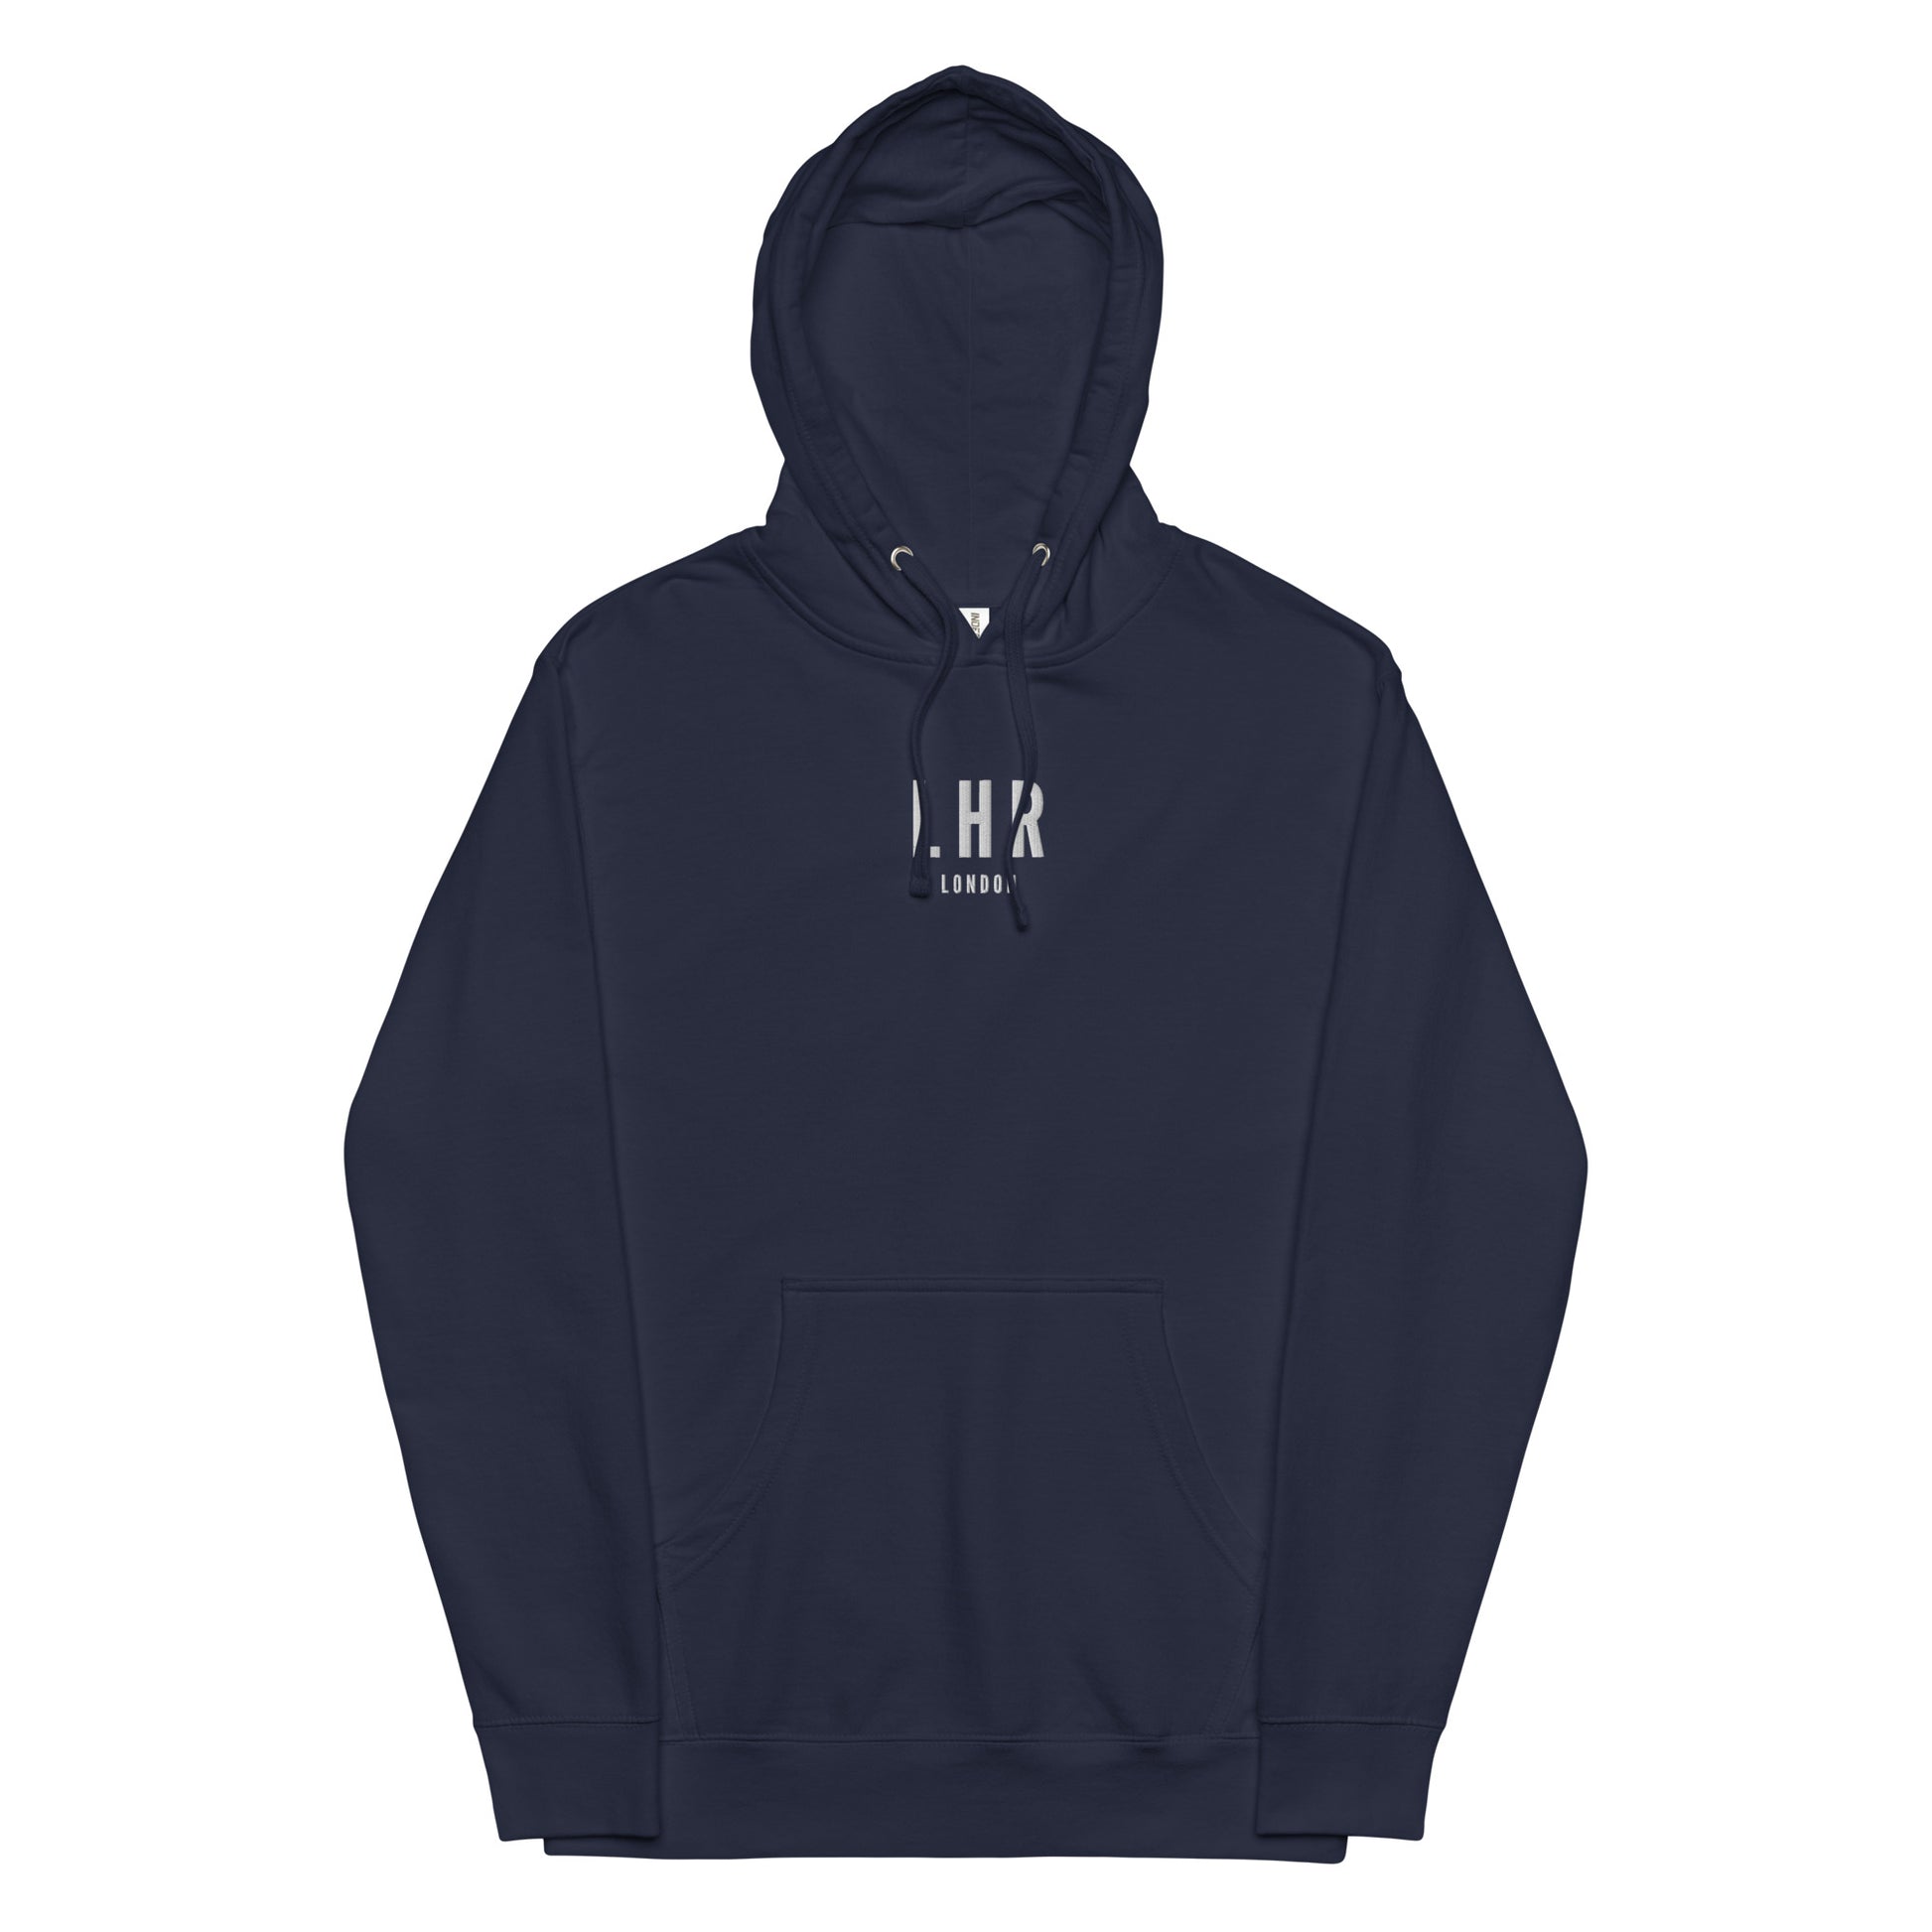 City Midweight Hoodie - White • LHR London • YHM Designs - Image 11